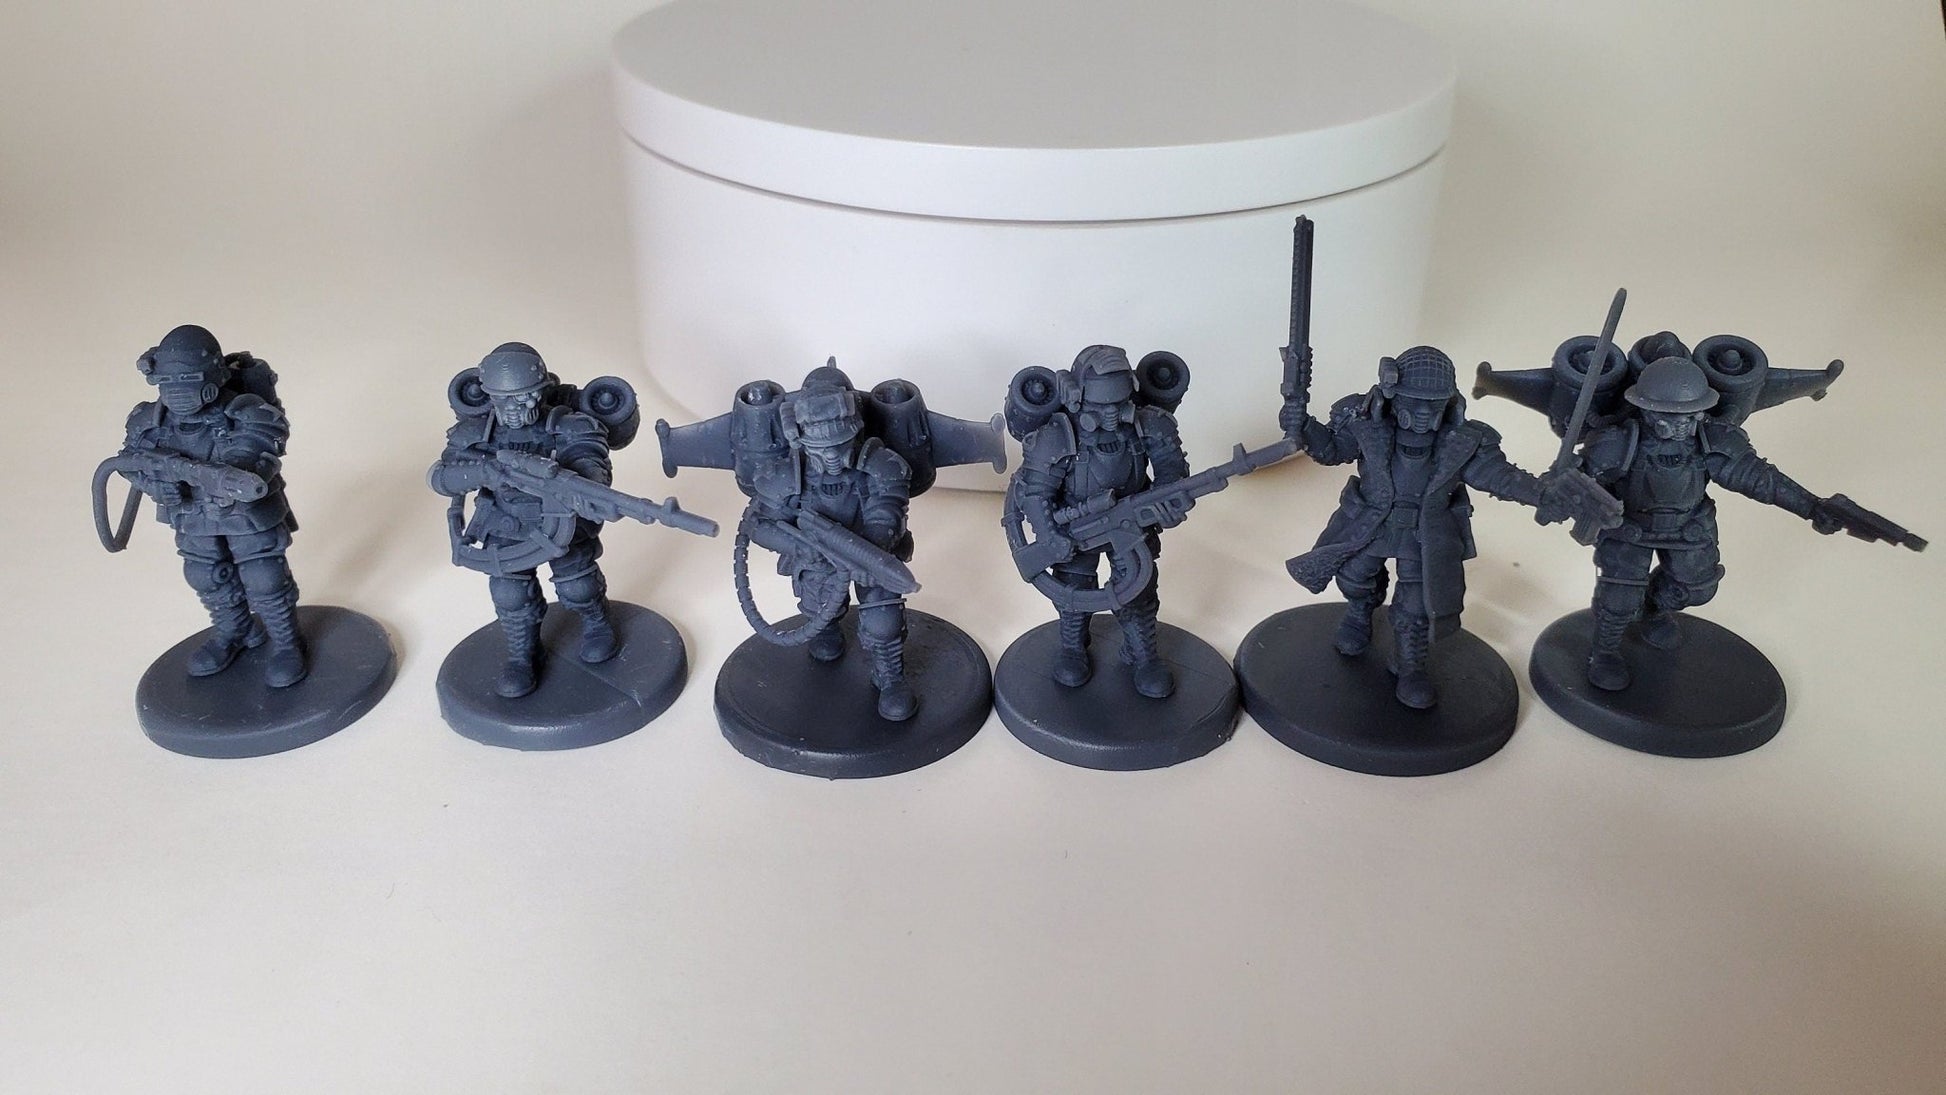 Drop Troopers Squad (Assembly Variant) - Concordian Starborne - Trisagion Models